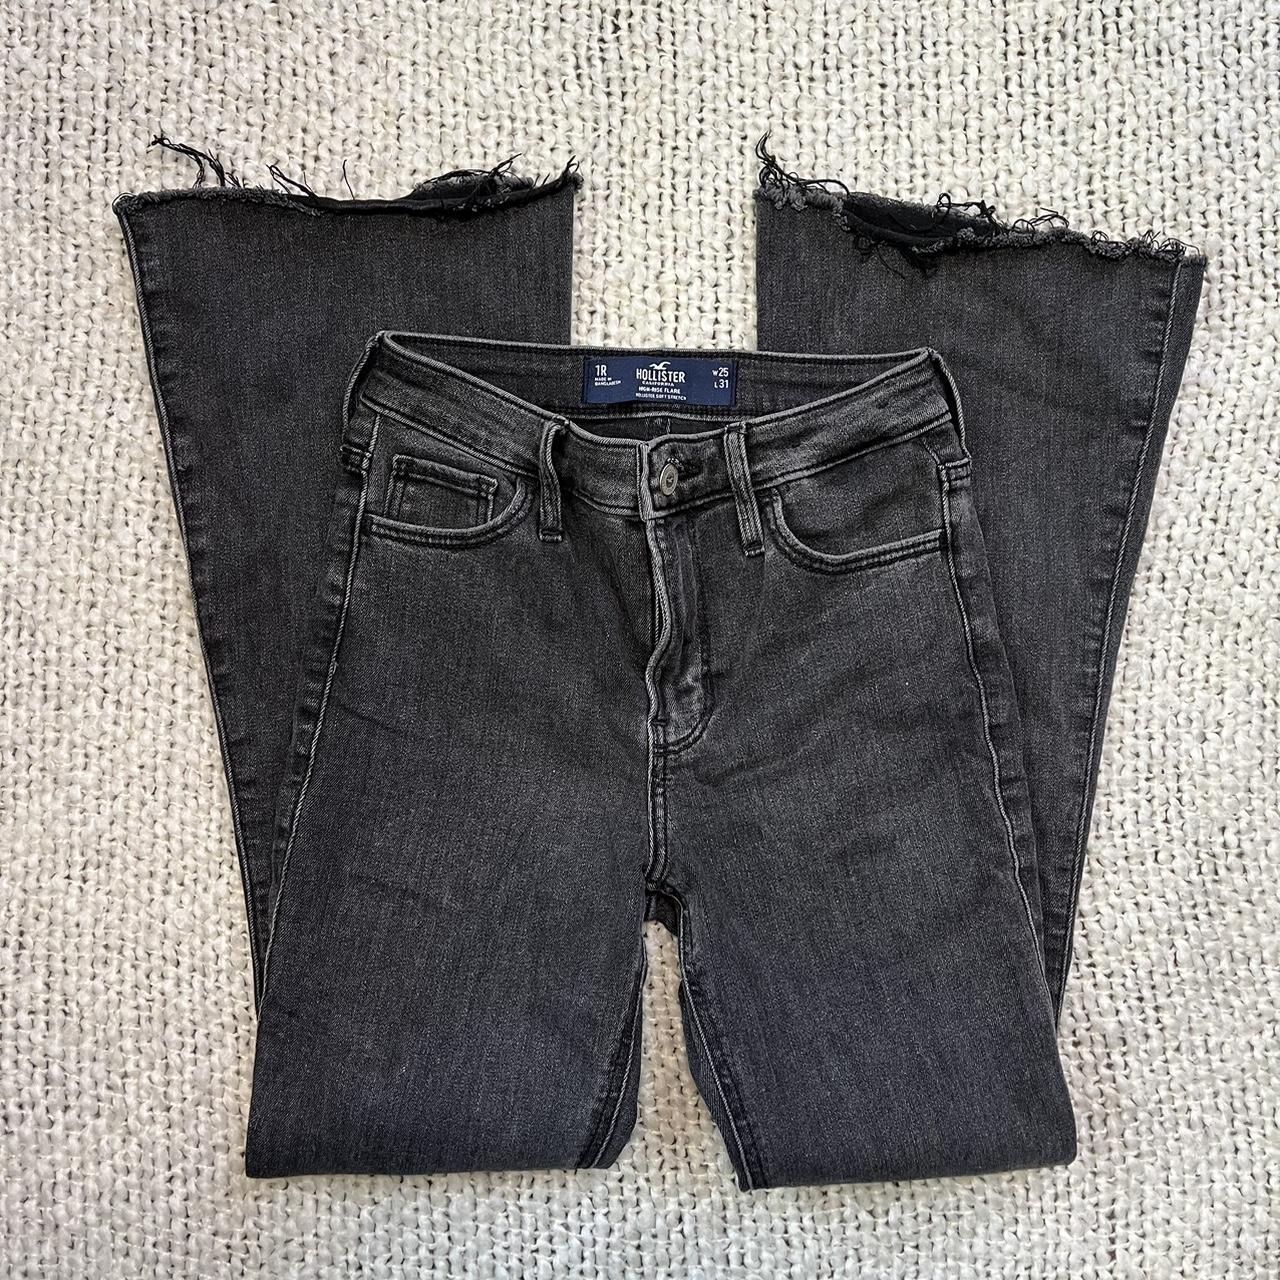 Distressed flare hollister jeans, High waisted, very